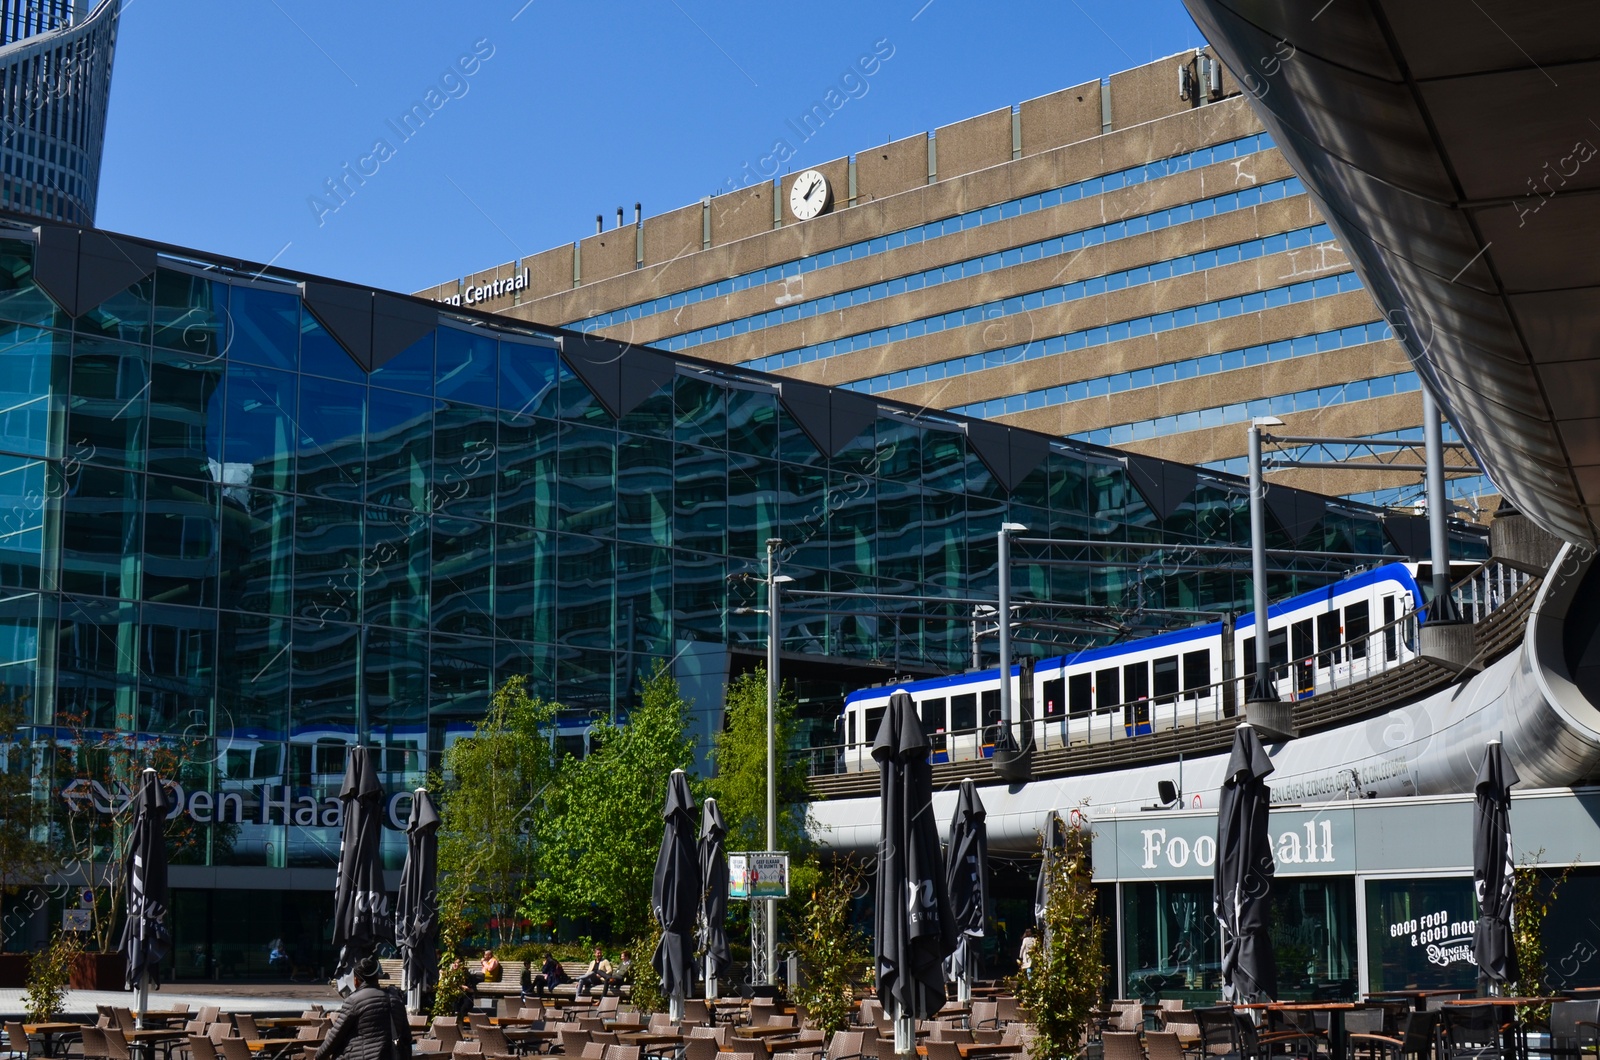 Photo of Hague, Netherlands - May 2, 2022: Central railway station near modern buildings in city